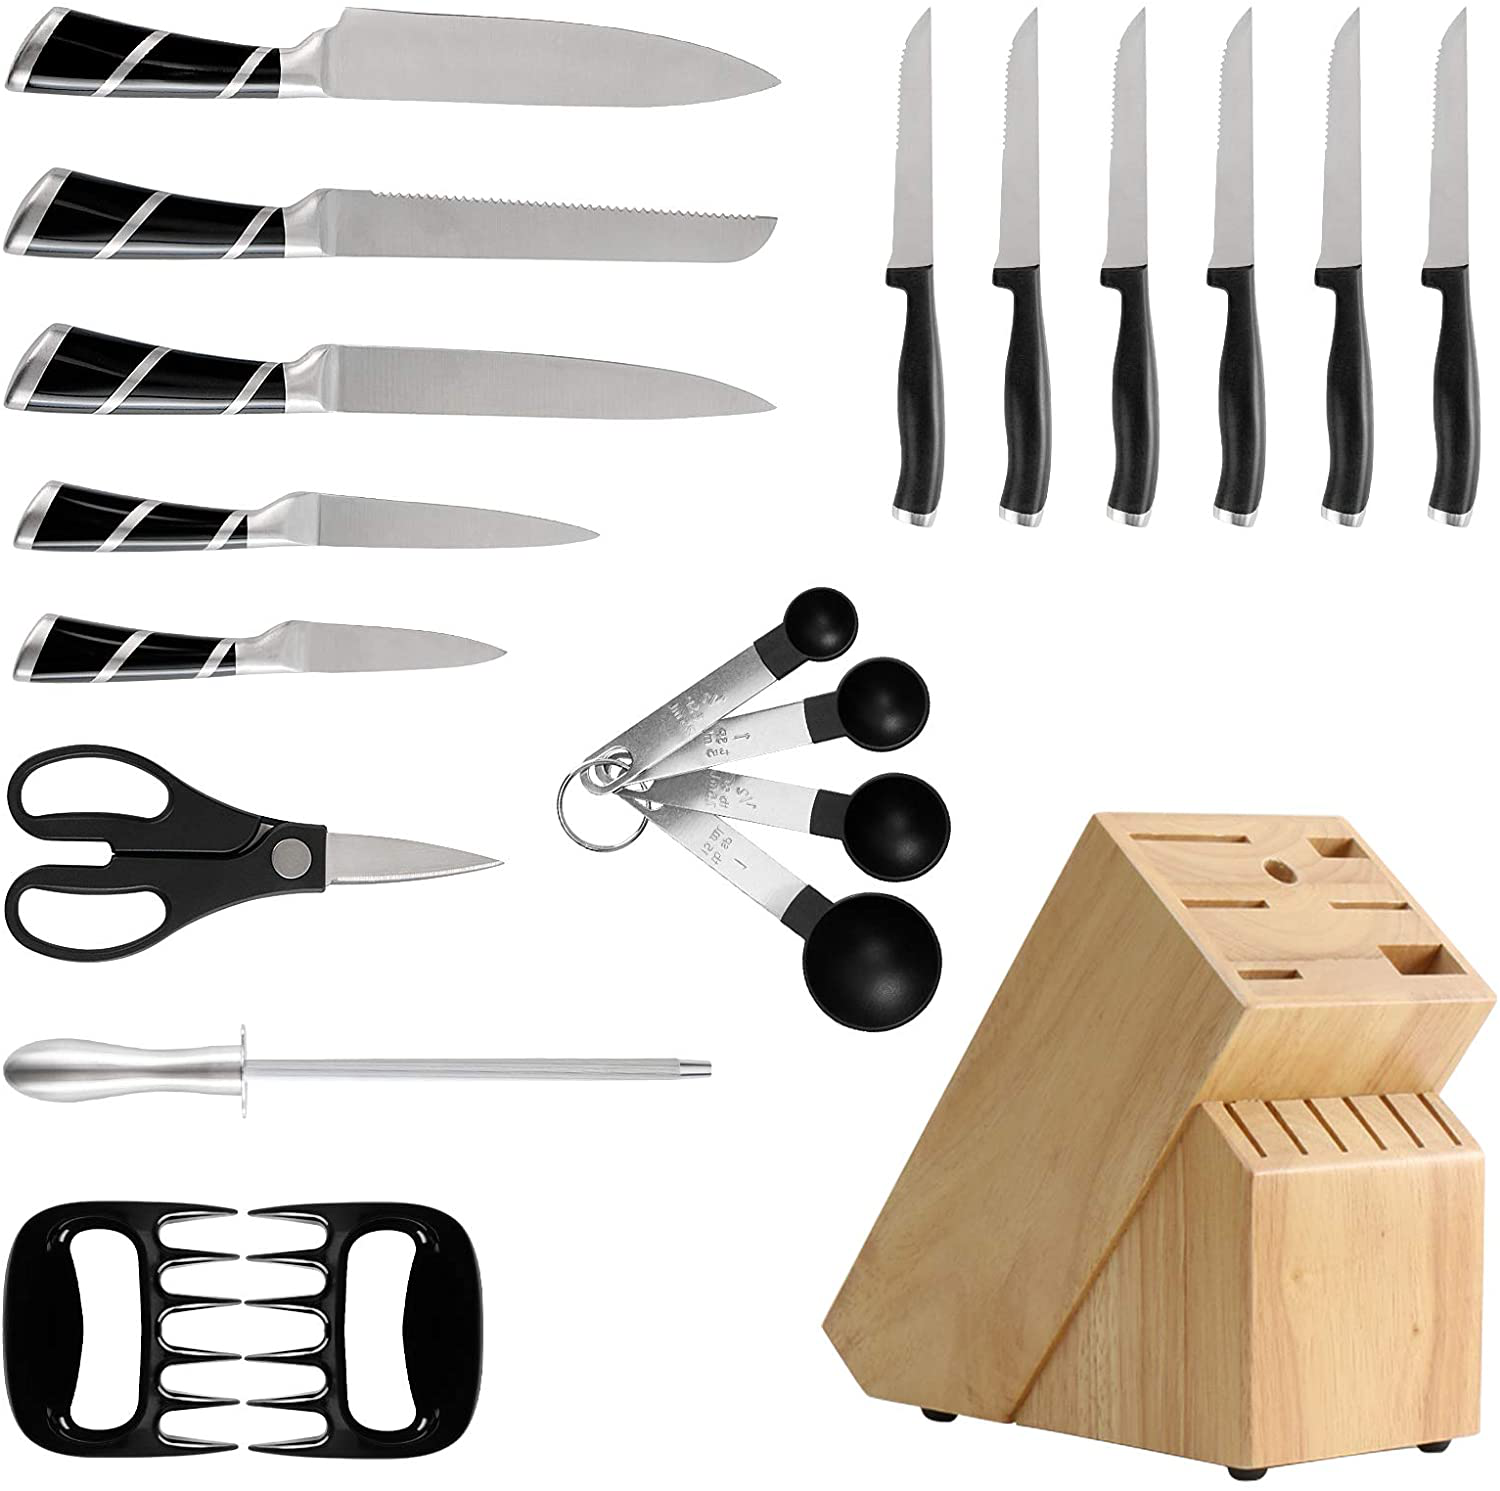 Knife Set, Rockindeer 20 Pieces Kitchen Knife Set with Block Wooden, Japan Stainless Steel Professional Ultra Sharp Boxed Chef Knife Set and Kitchen Tool Set